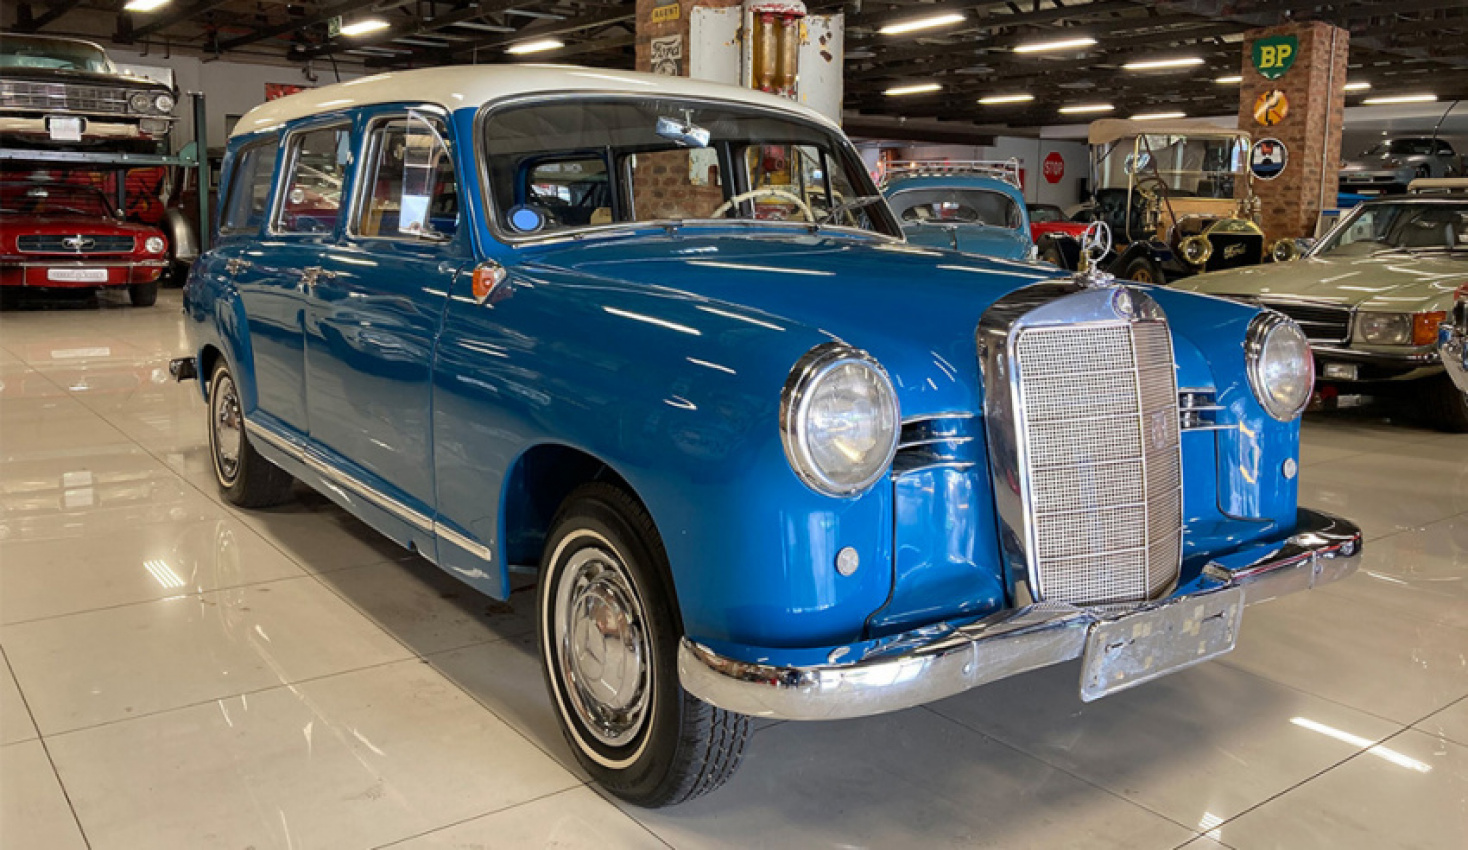 autos, cars, news, classic cars, creative rides, high street auctions, louis coetzer, massive classic car auction in johannesburg – photos of what’s on offer